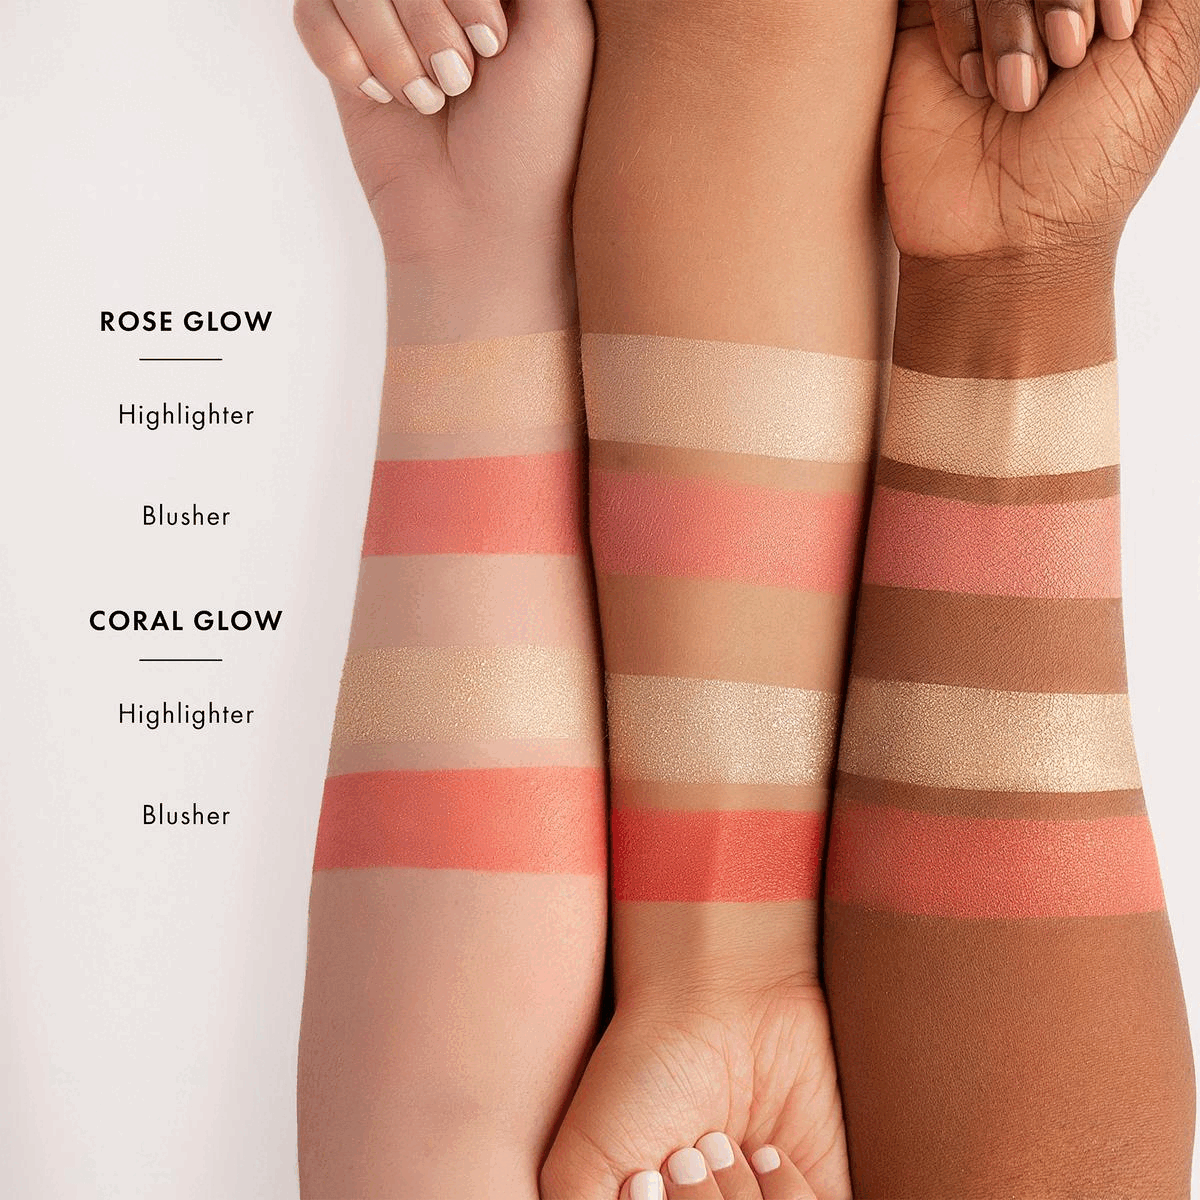 Image 1, showing the shades modelled across three different skin tones, rose glow, highlighter, blusher. Coral glow, highlighter, blusher Image 2, Before and After, Jilda wears silk glow duo in Coral